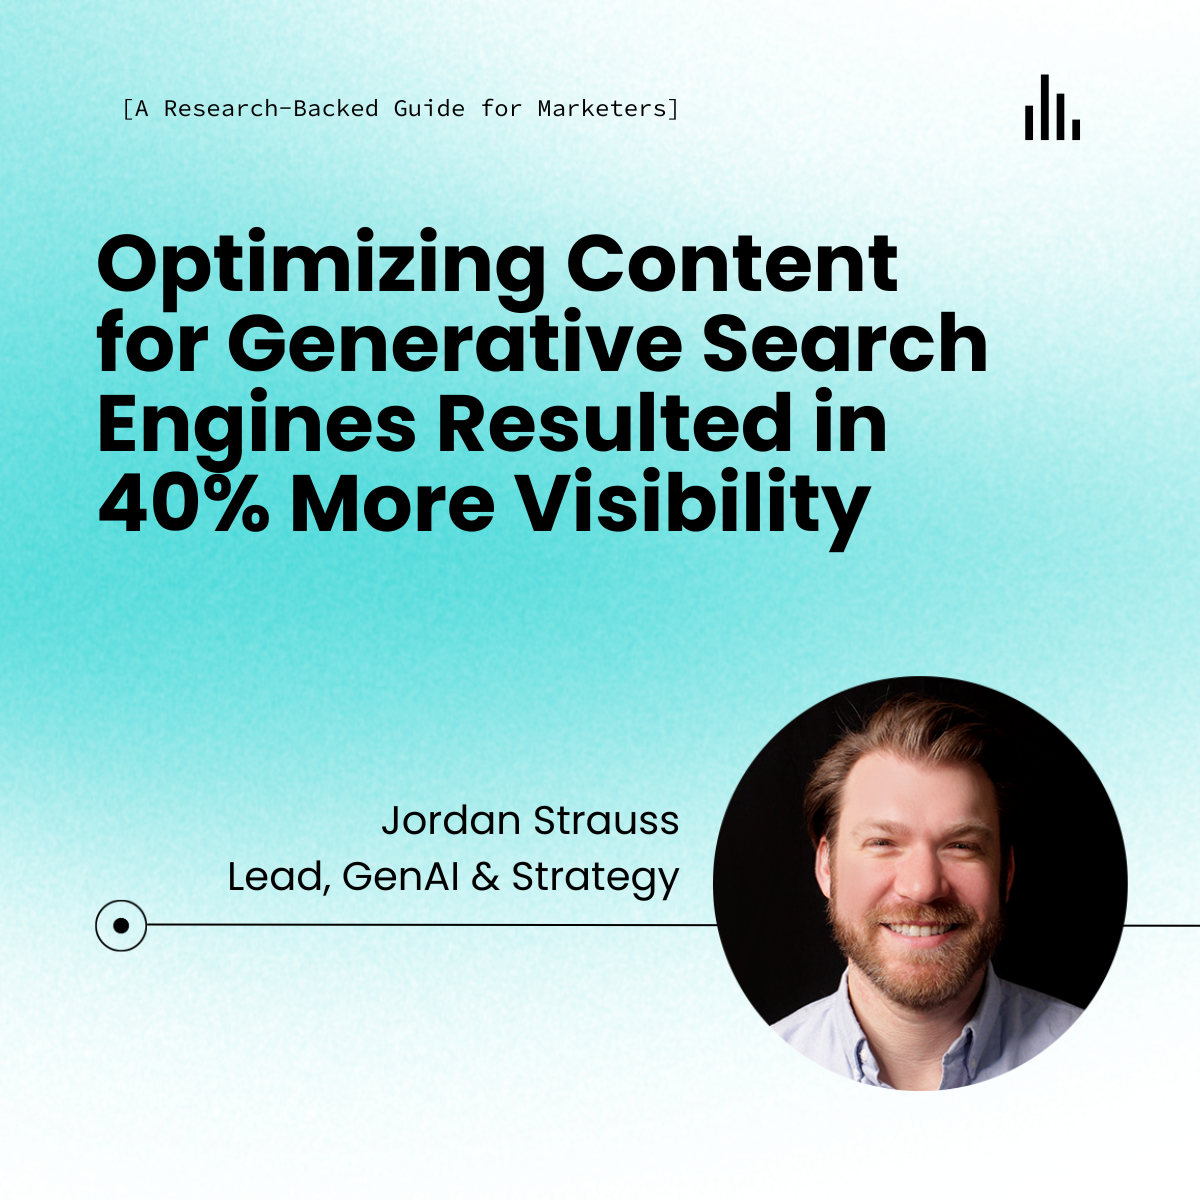 Optimizing Content for Generative Search Engines Resulted in 40% More Visibility